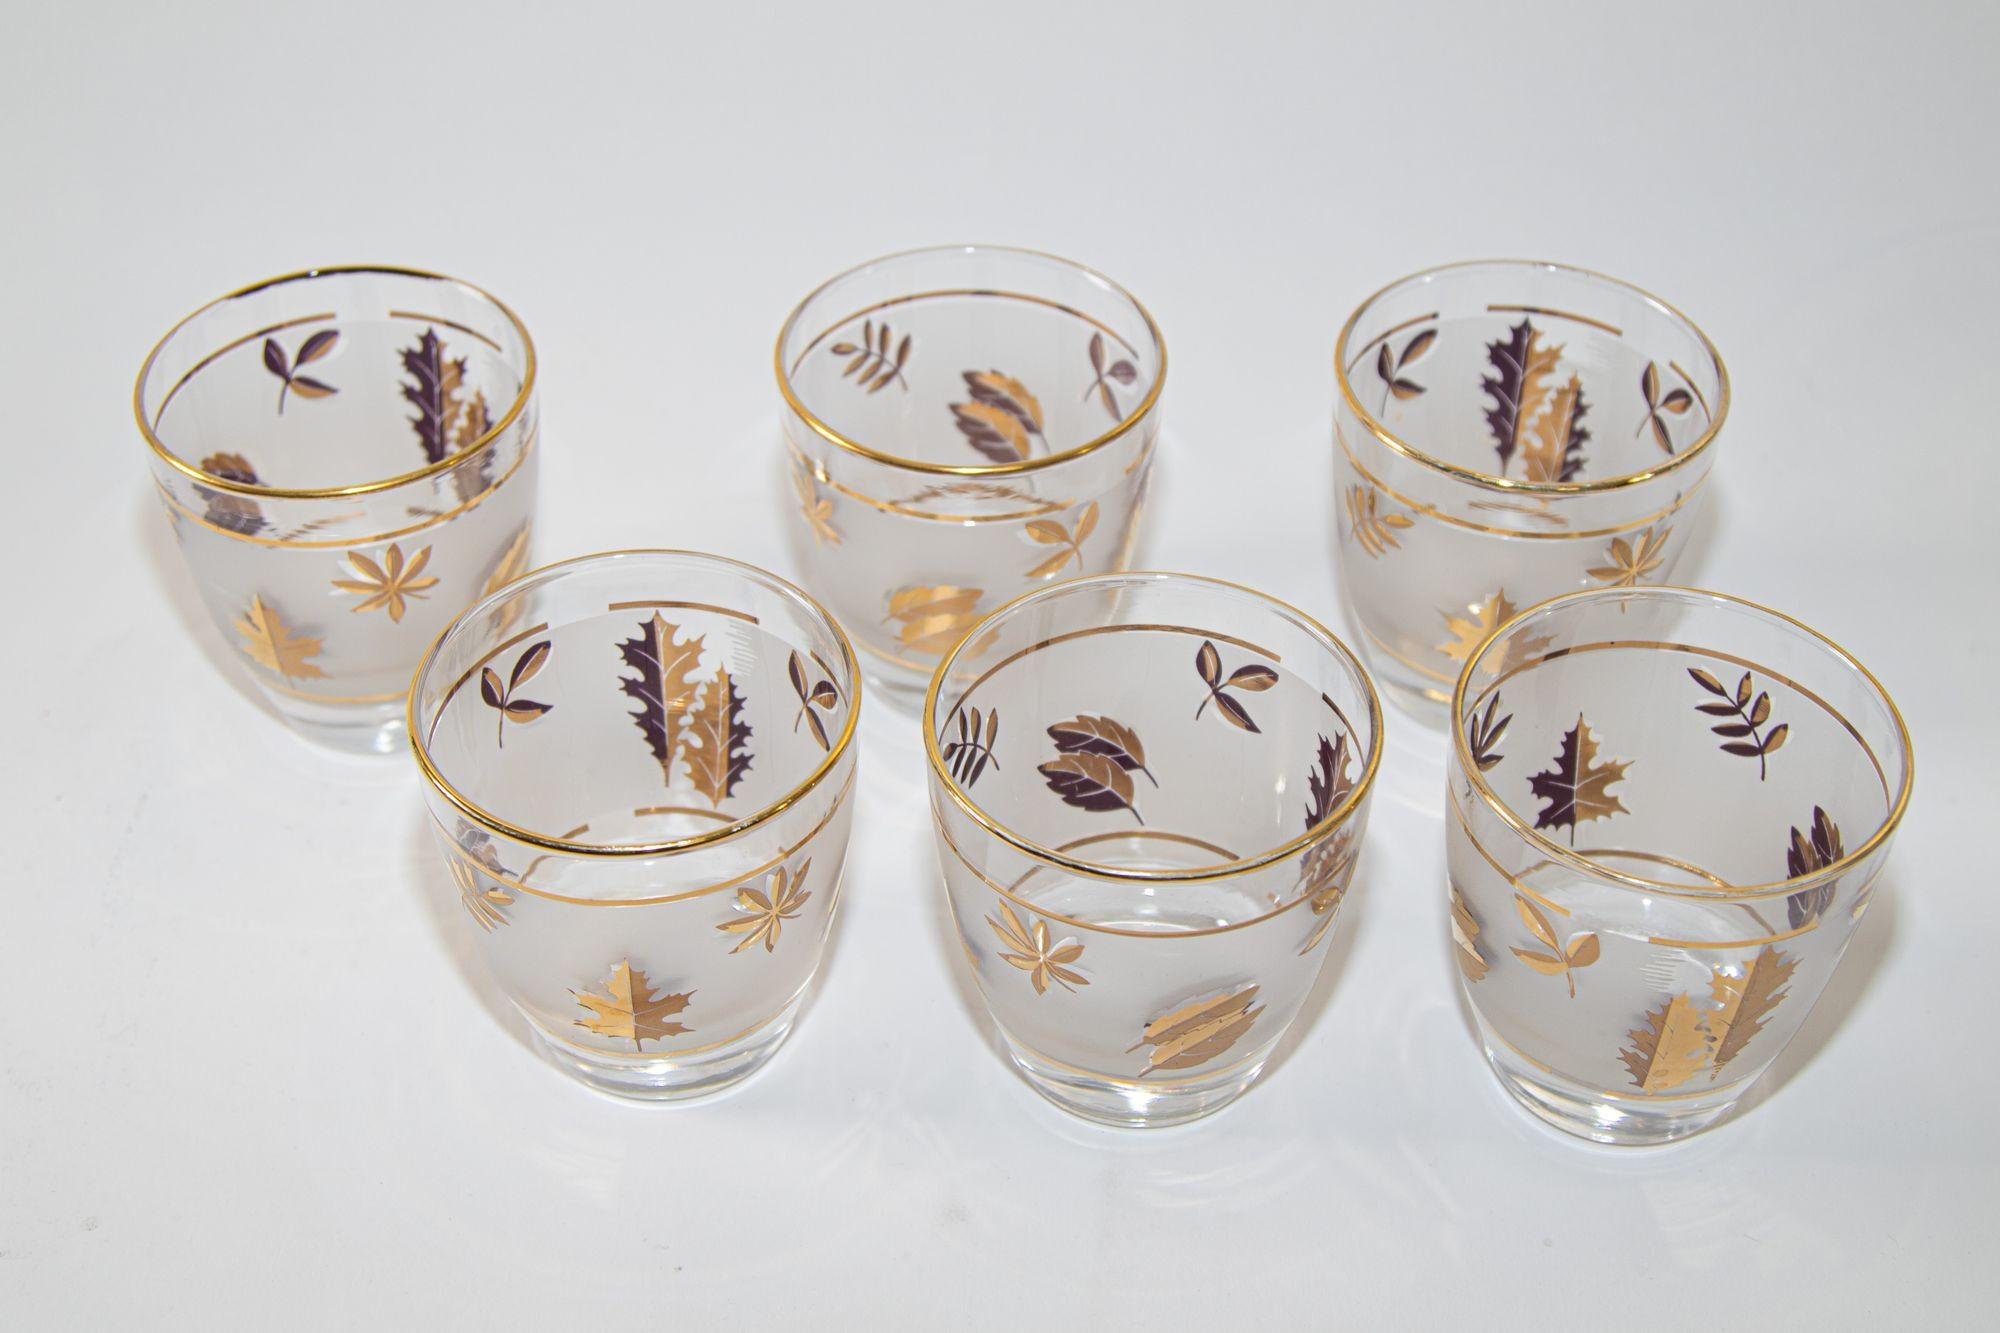 Vintage MCM Libbey Frosted & Golden Foliage Cocktail Glasses, Set of 6.
Elegant vintage Libbey Golden Foliage barware frosted glasses with leaves pattern in a gold finish.
Set includes 6 lowball glasses.
Hollywood Regency style Mid-Century Modern